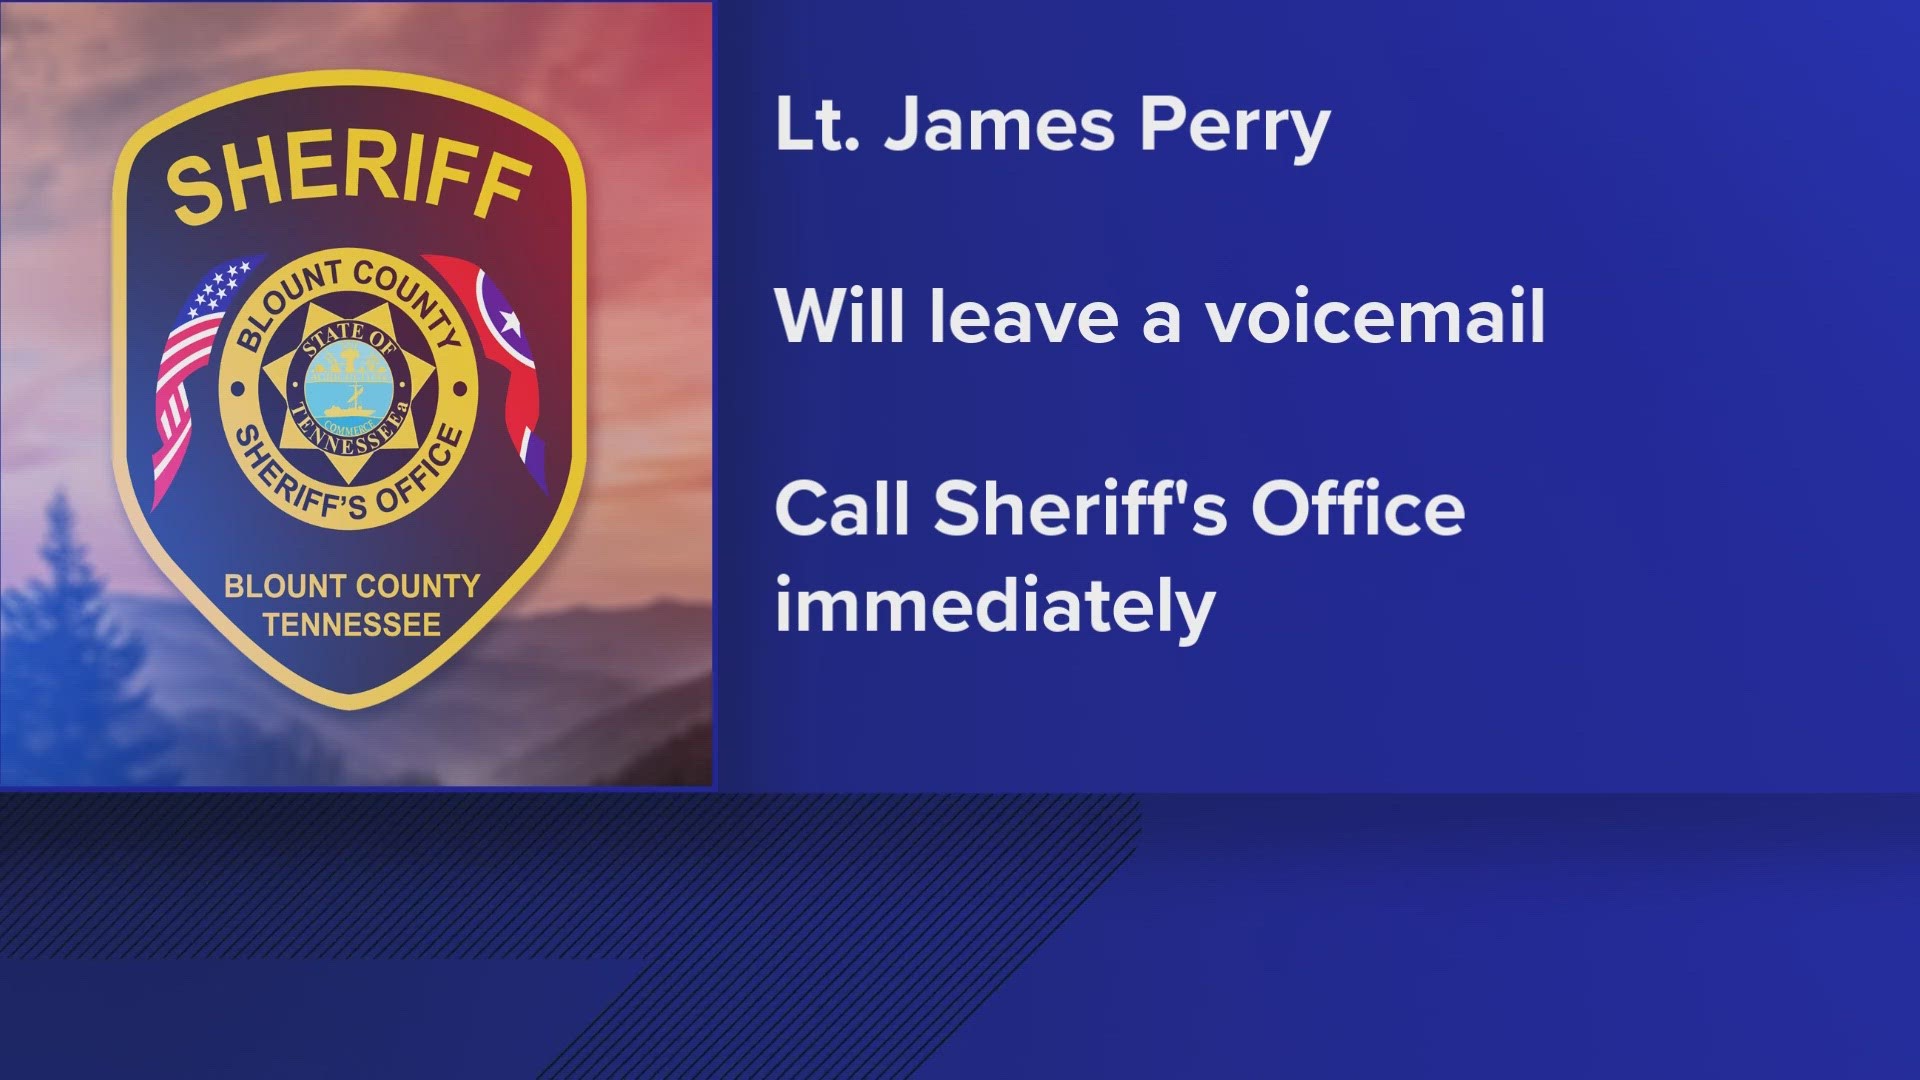 In the scam, a thief leaves a voicemail pretending to be "Lt. James Perry" and tries to lure people into sending money.